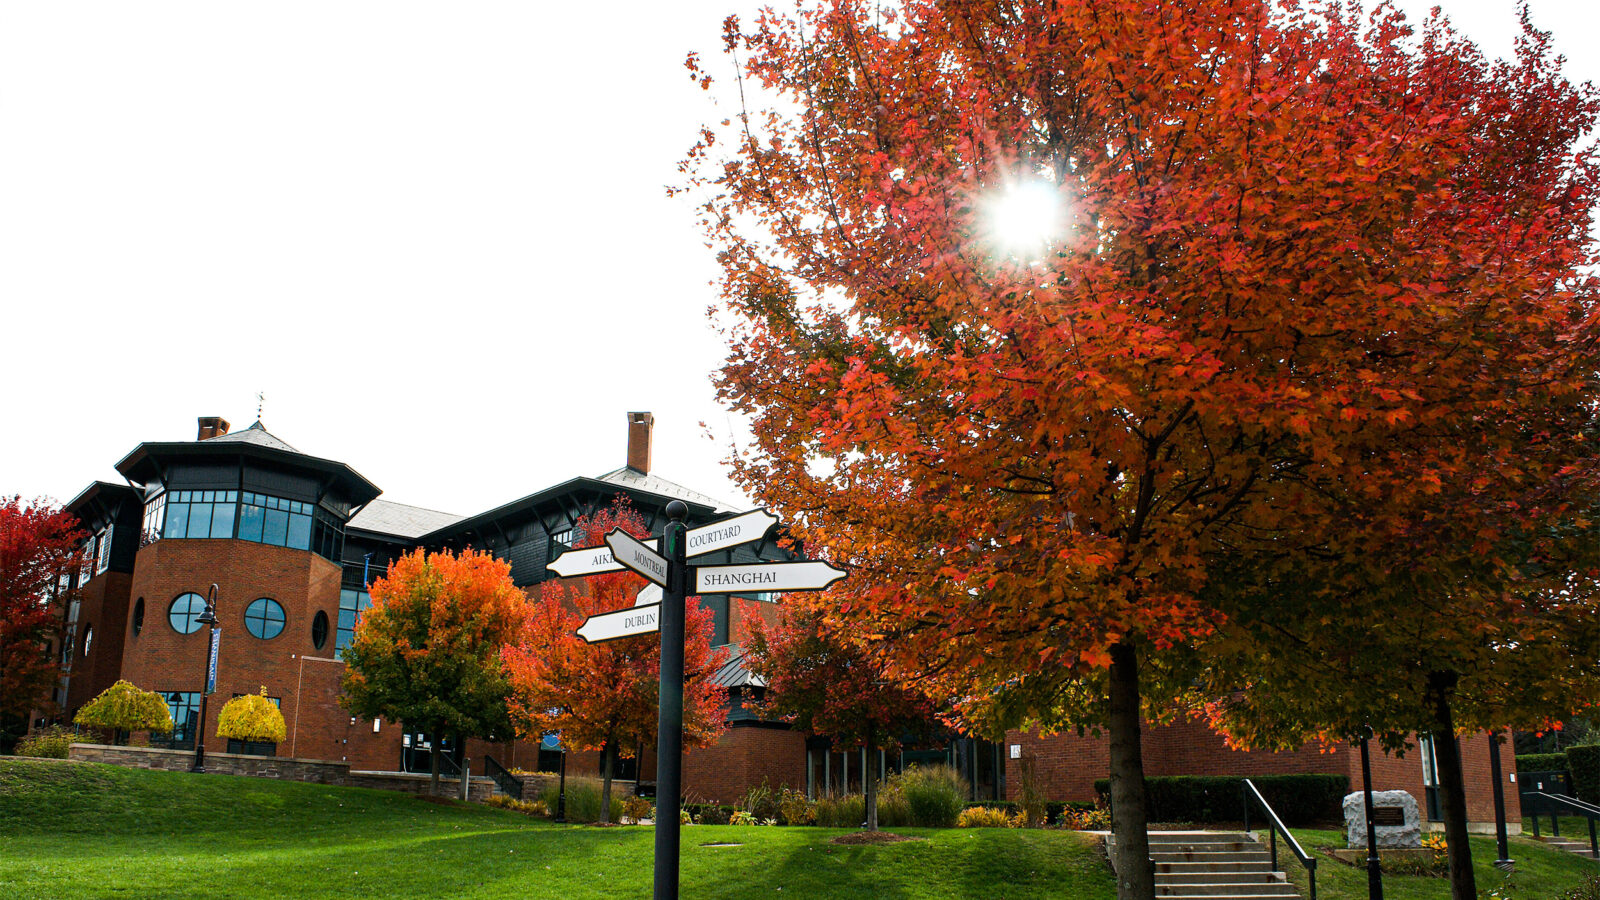 Champlain campus in the fall